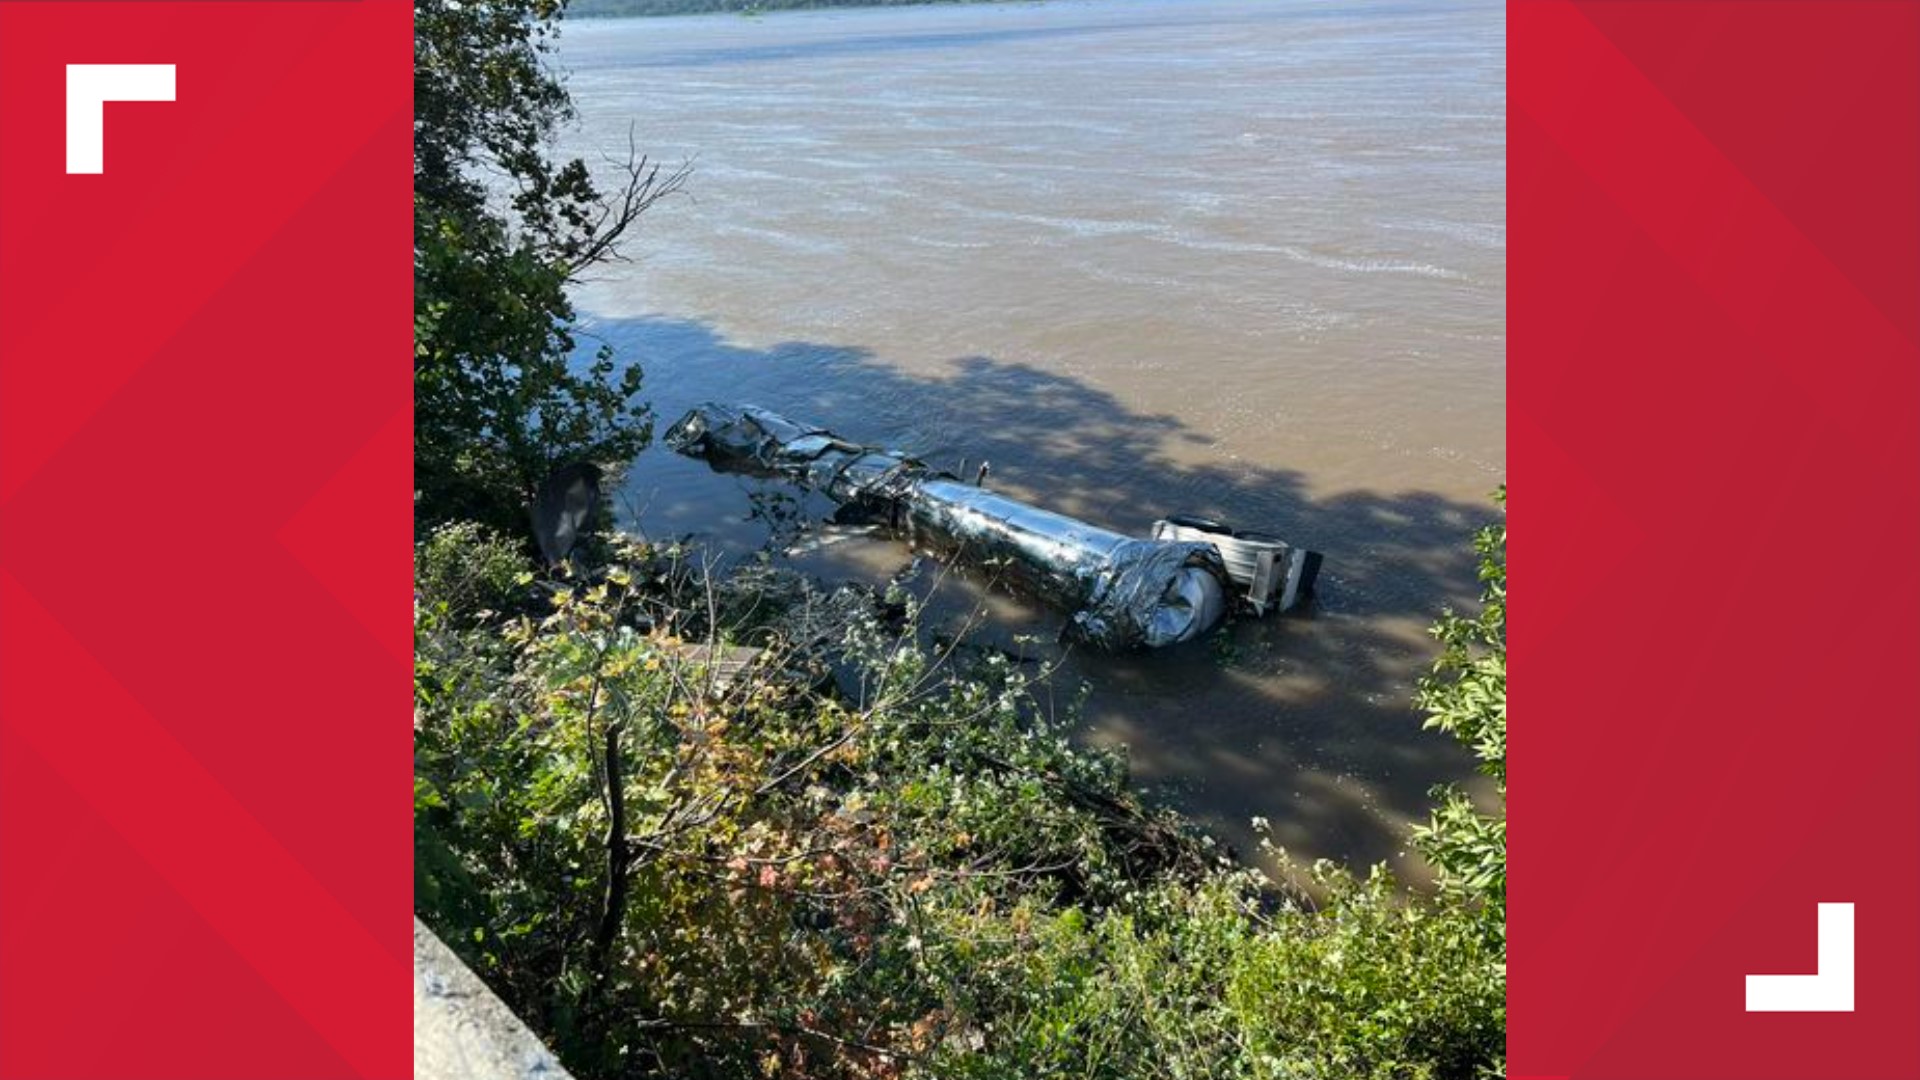 Hazmat crews responded to a portion of the Susquehanna River near Route 22/322 in Dauphin County after a tractor-trailer crashed into the waterway.